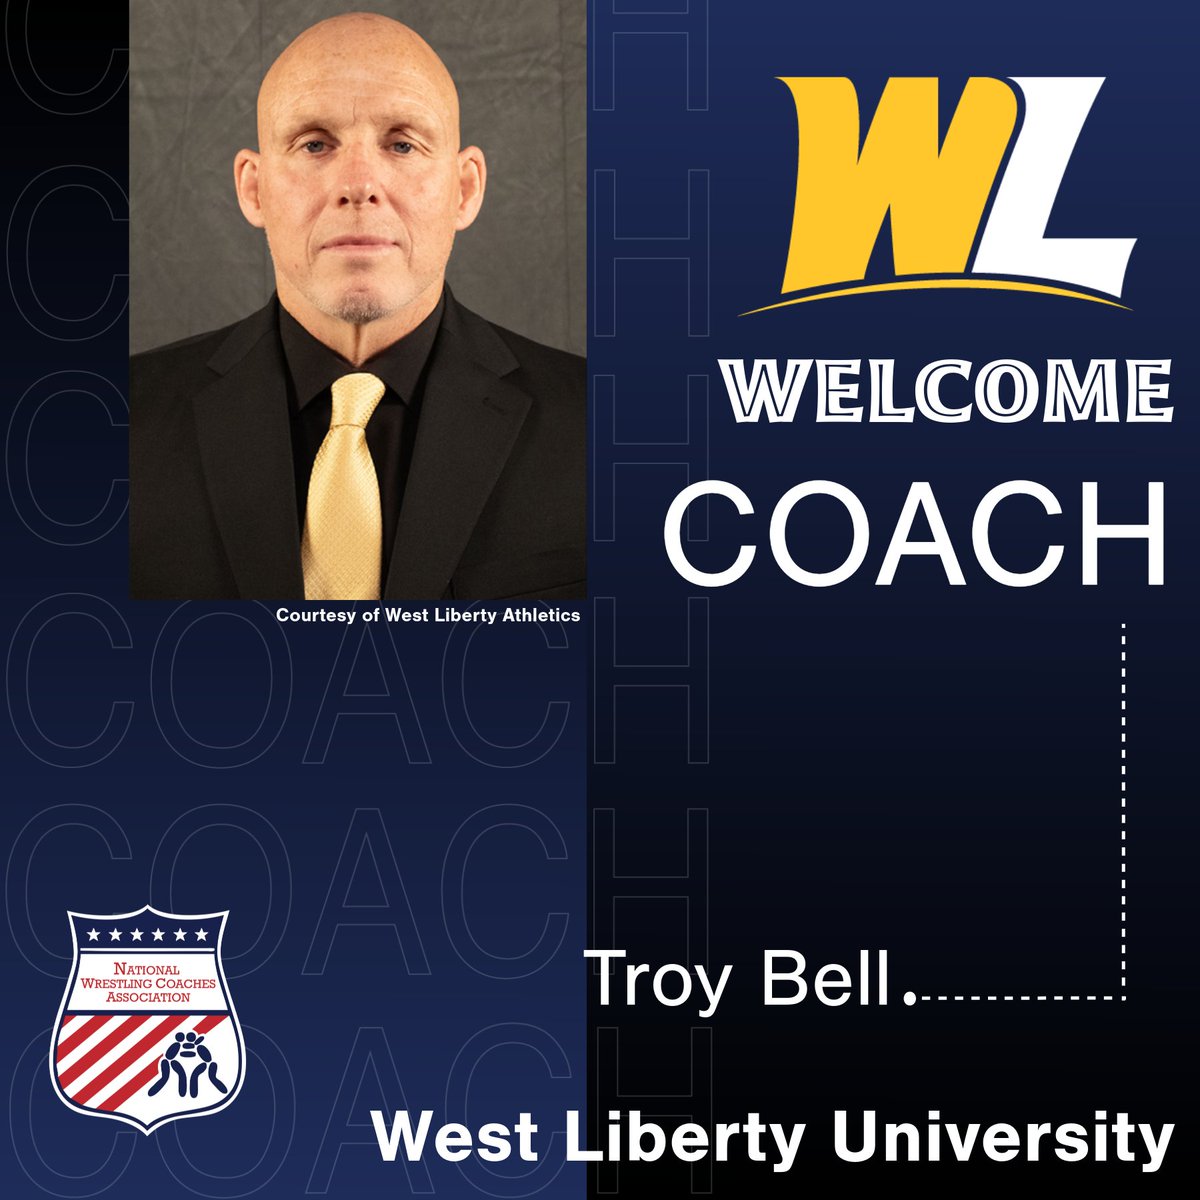 Troy Bell Named First Head Coach for West Liberty Women’s Wrestling Program 📰 bit.ly/3QA94M4